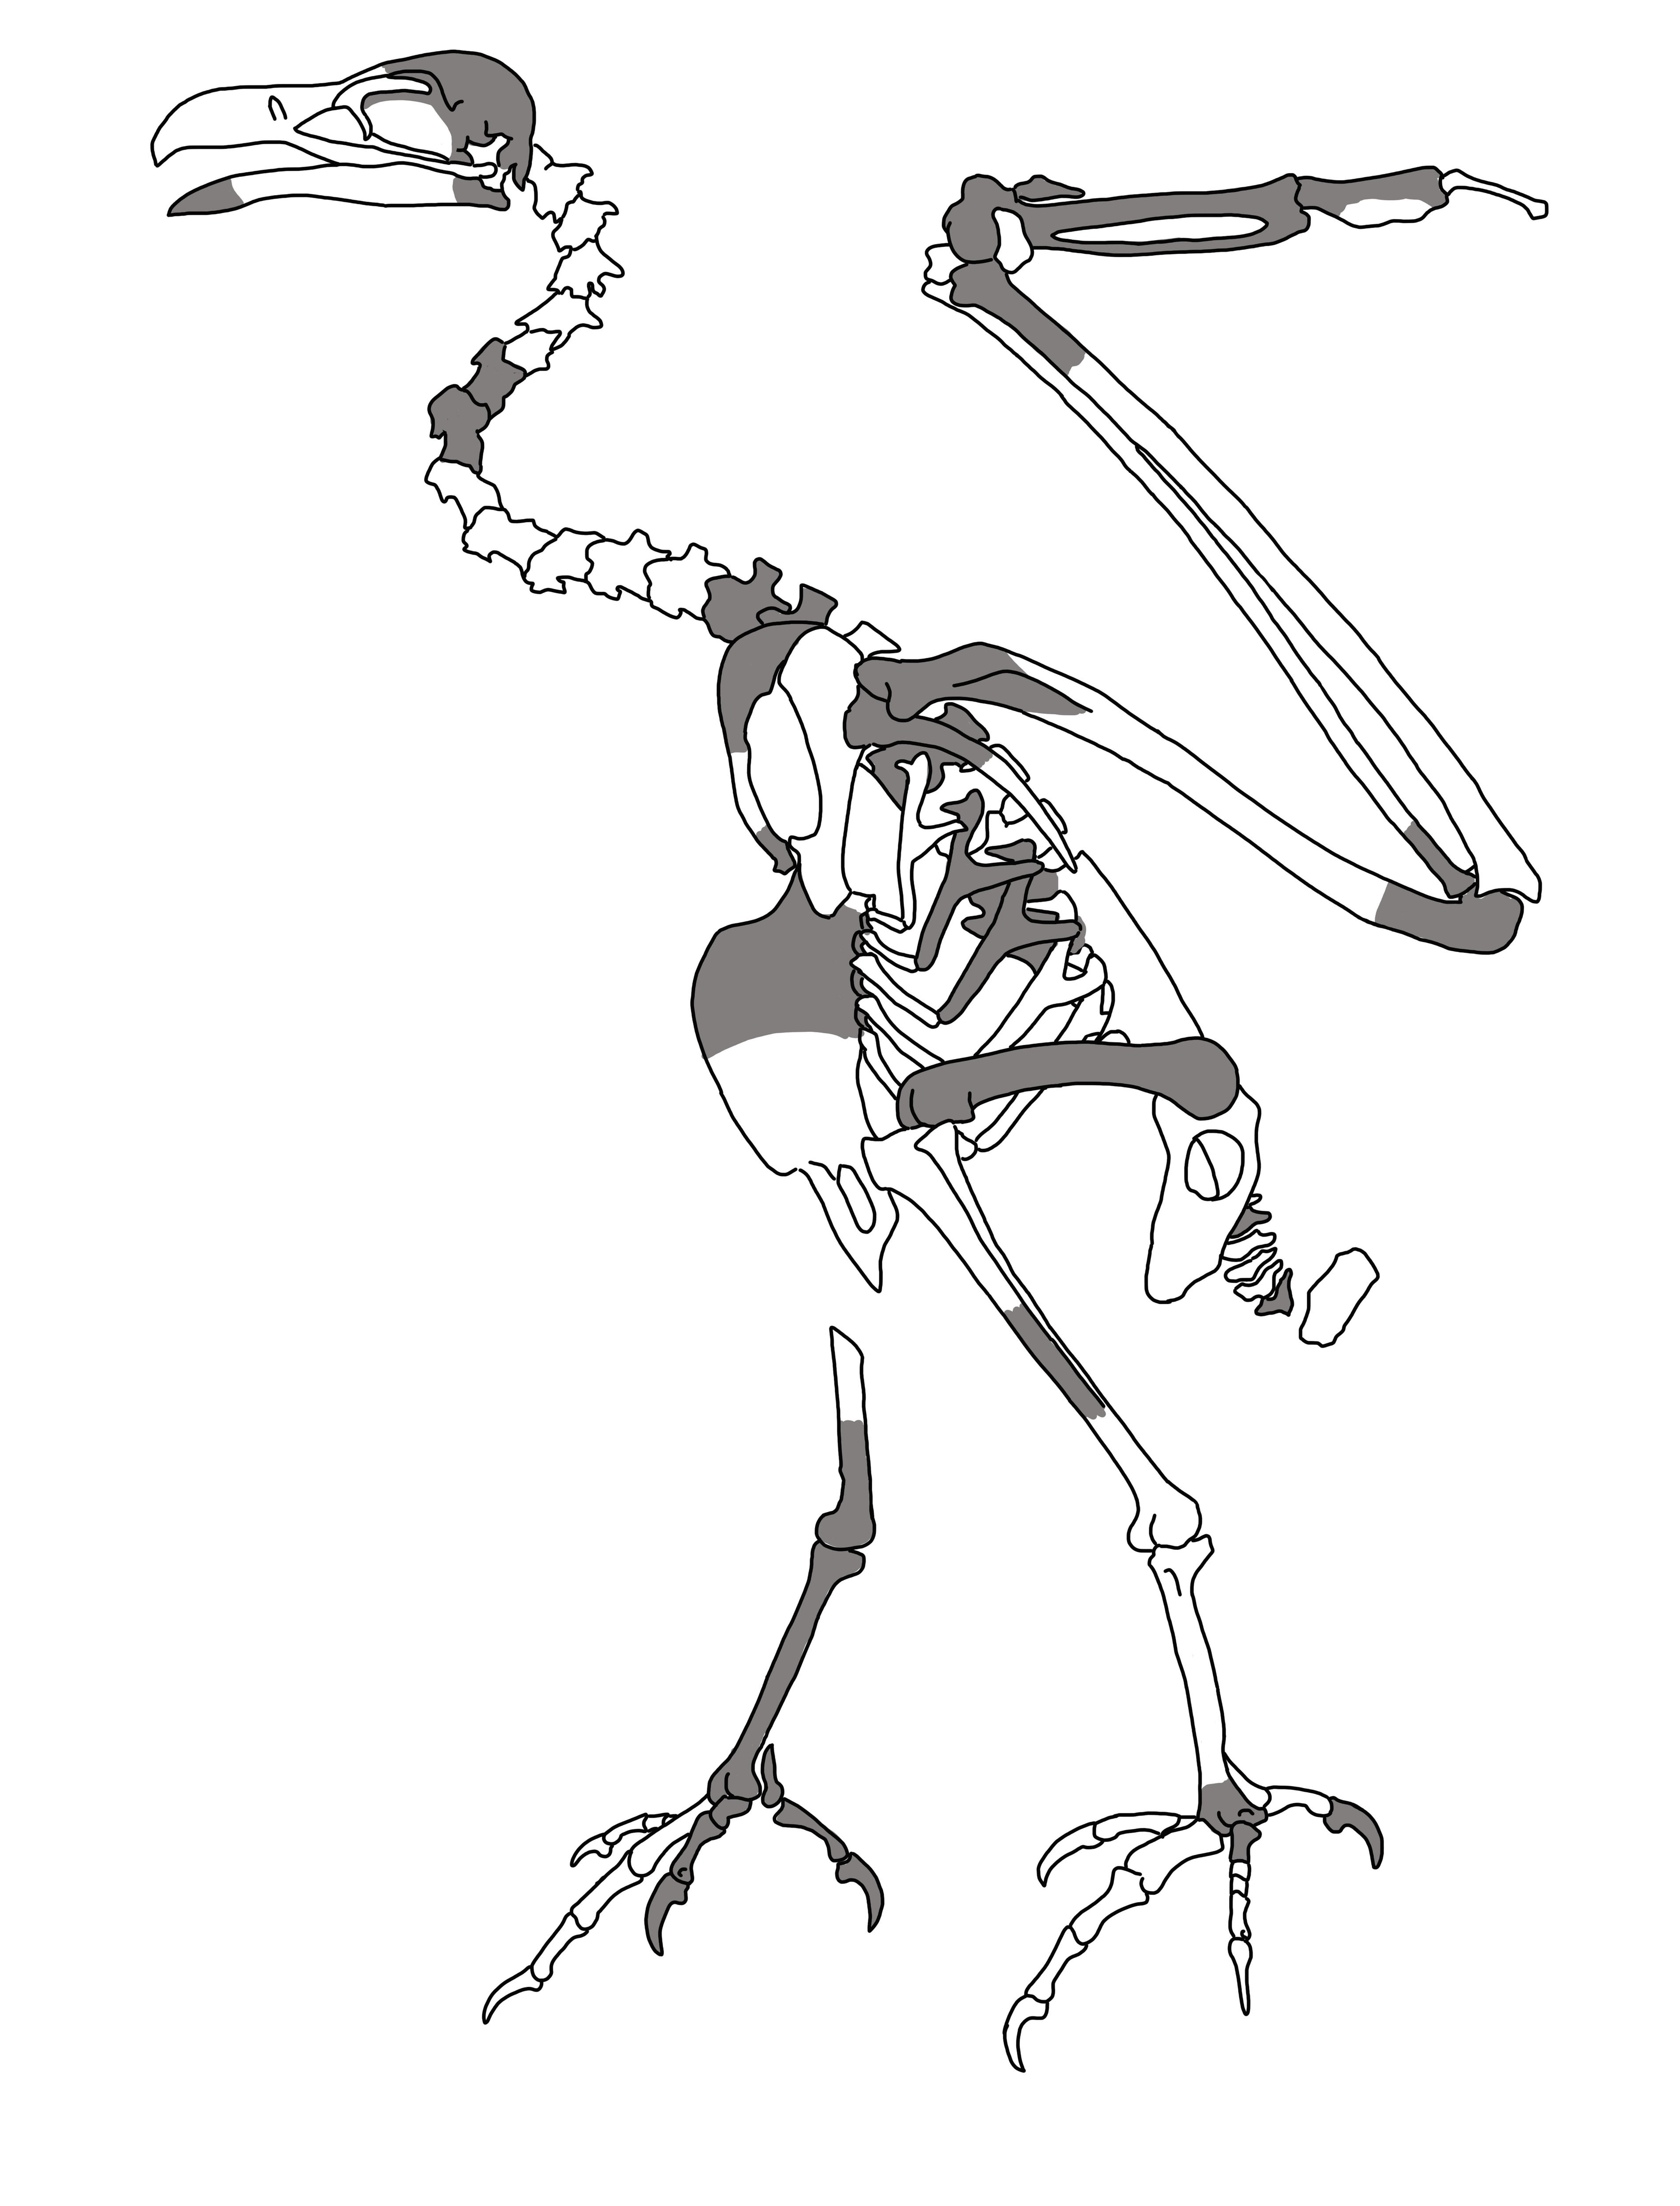 A drawing of the skeleton of an extinct eagle.